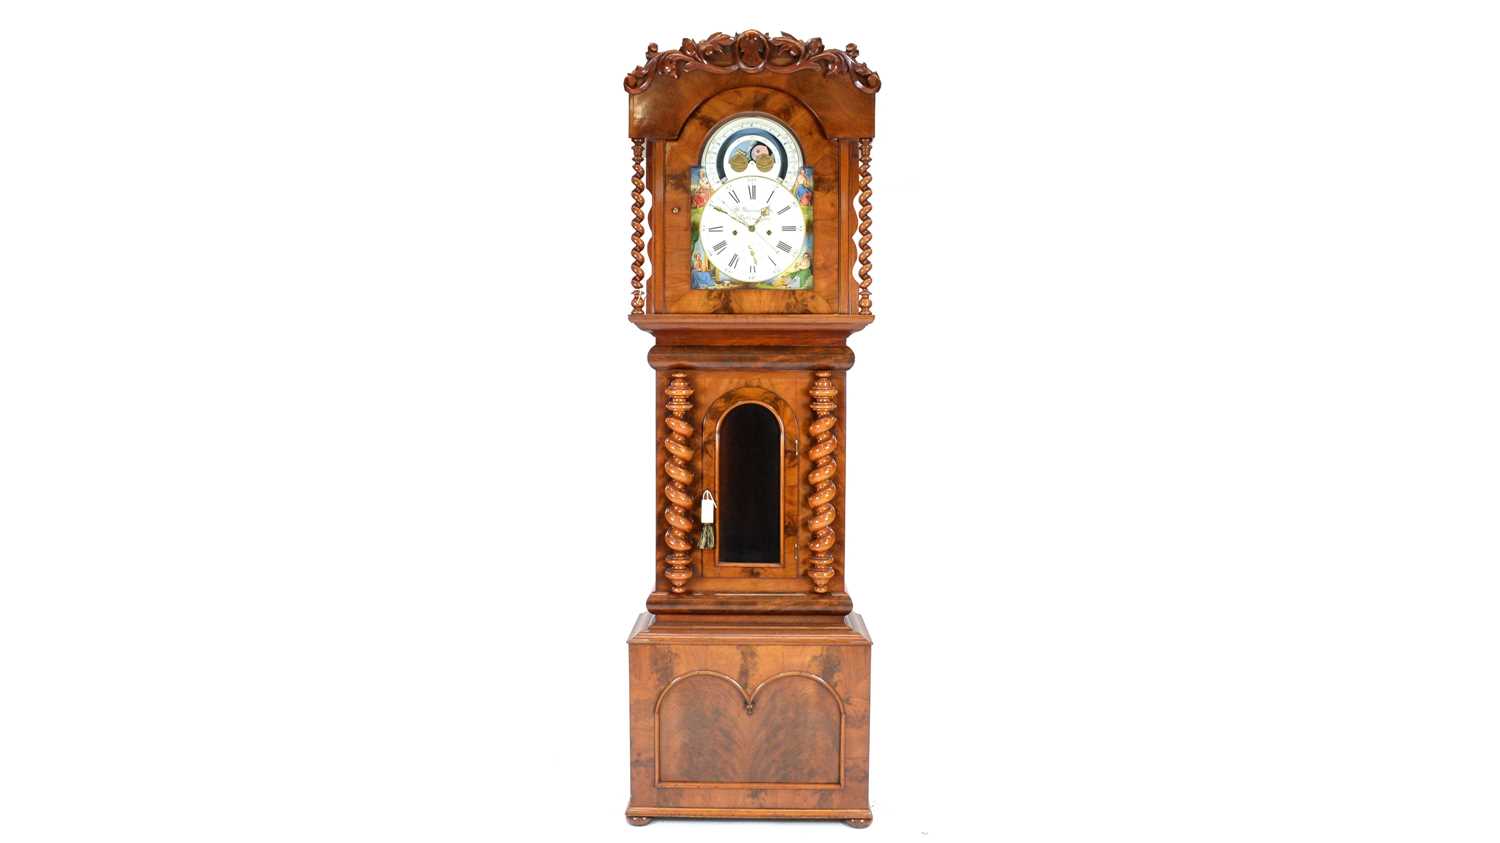 1030 - W. Murray & Son, Bellingham: a large and impressive 19th C clock.